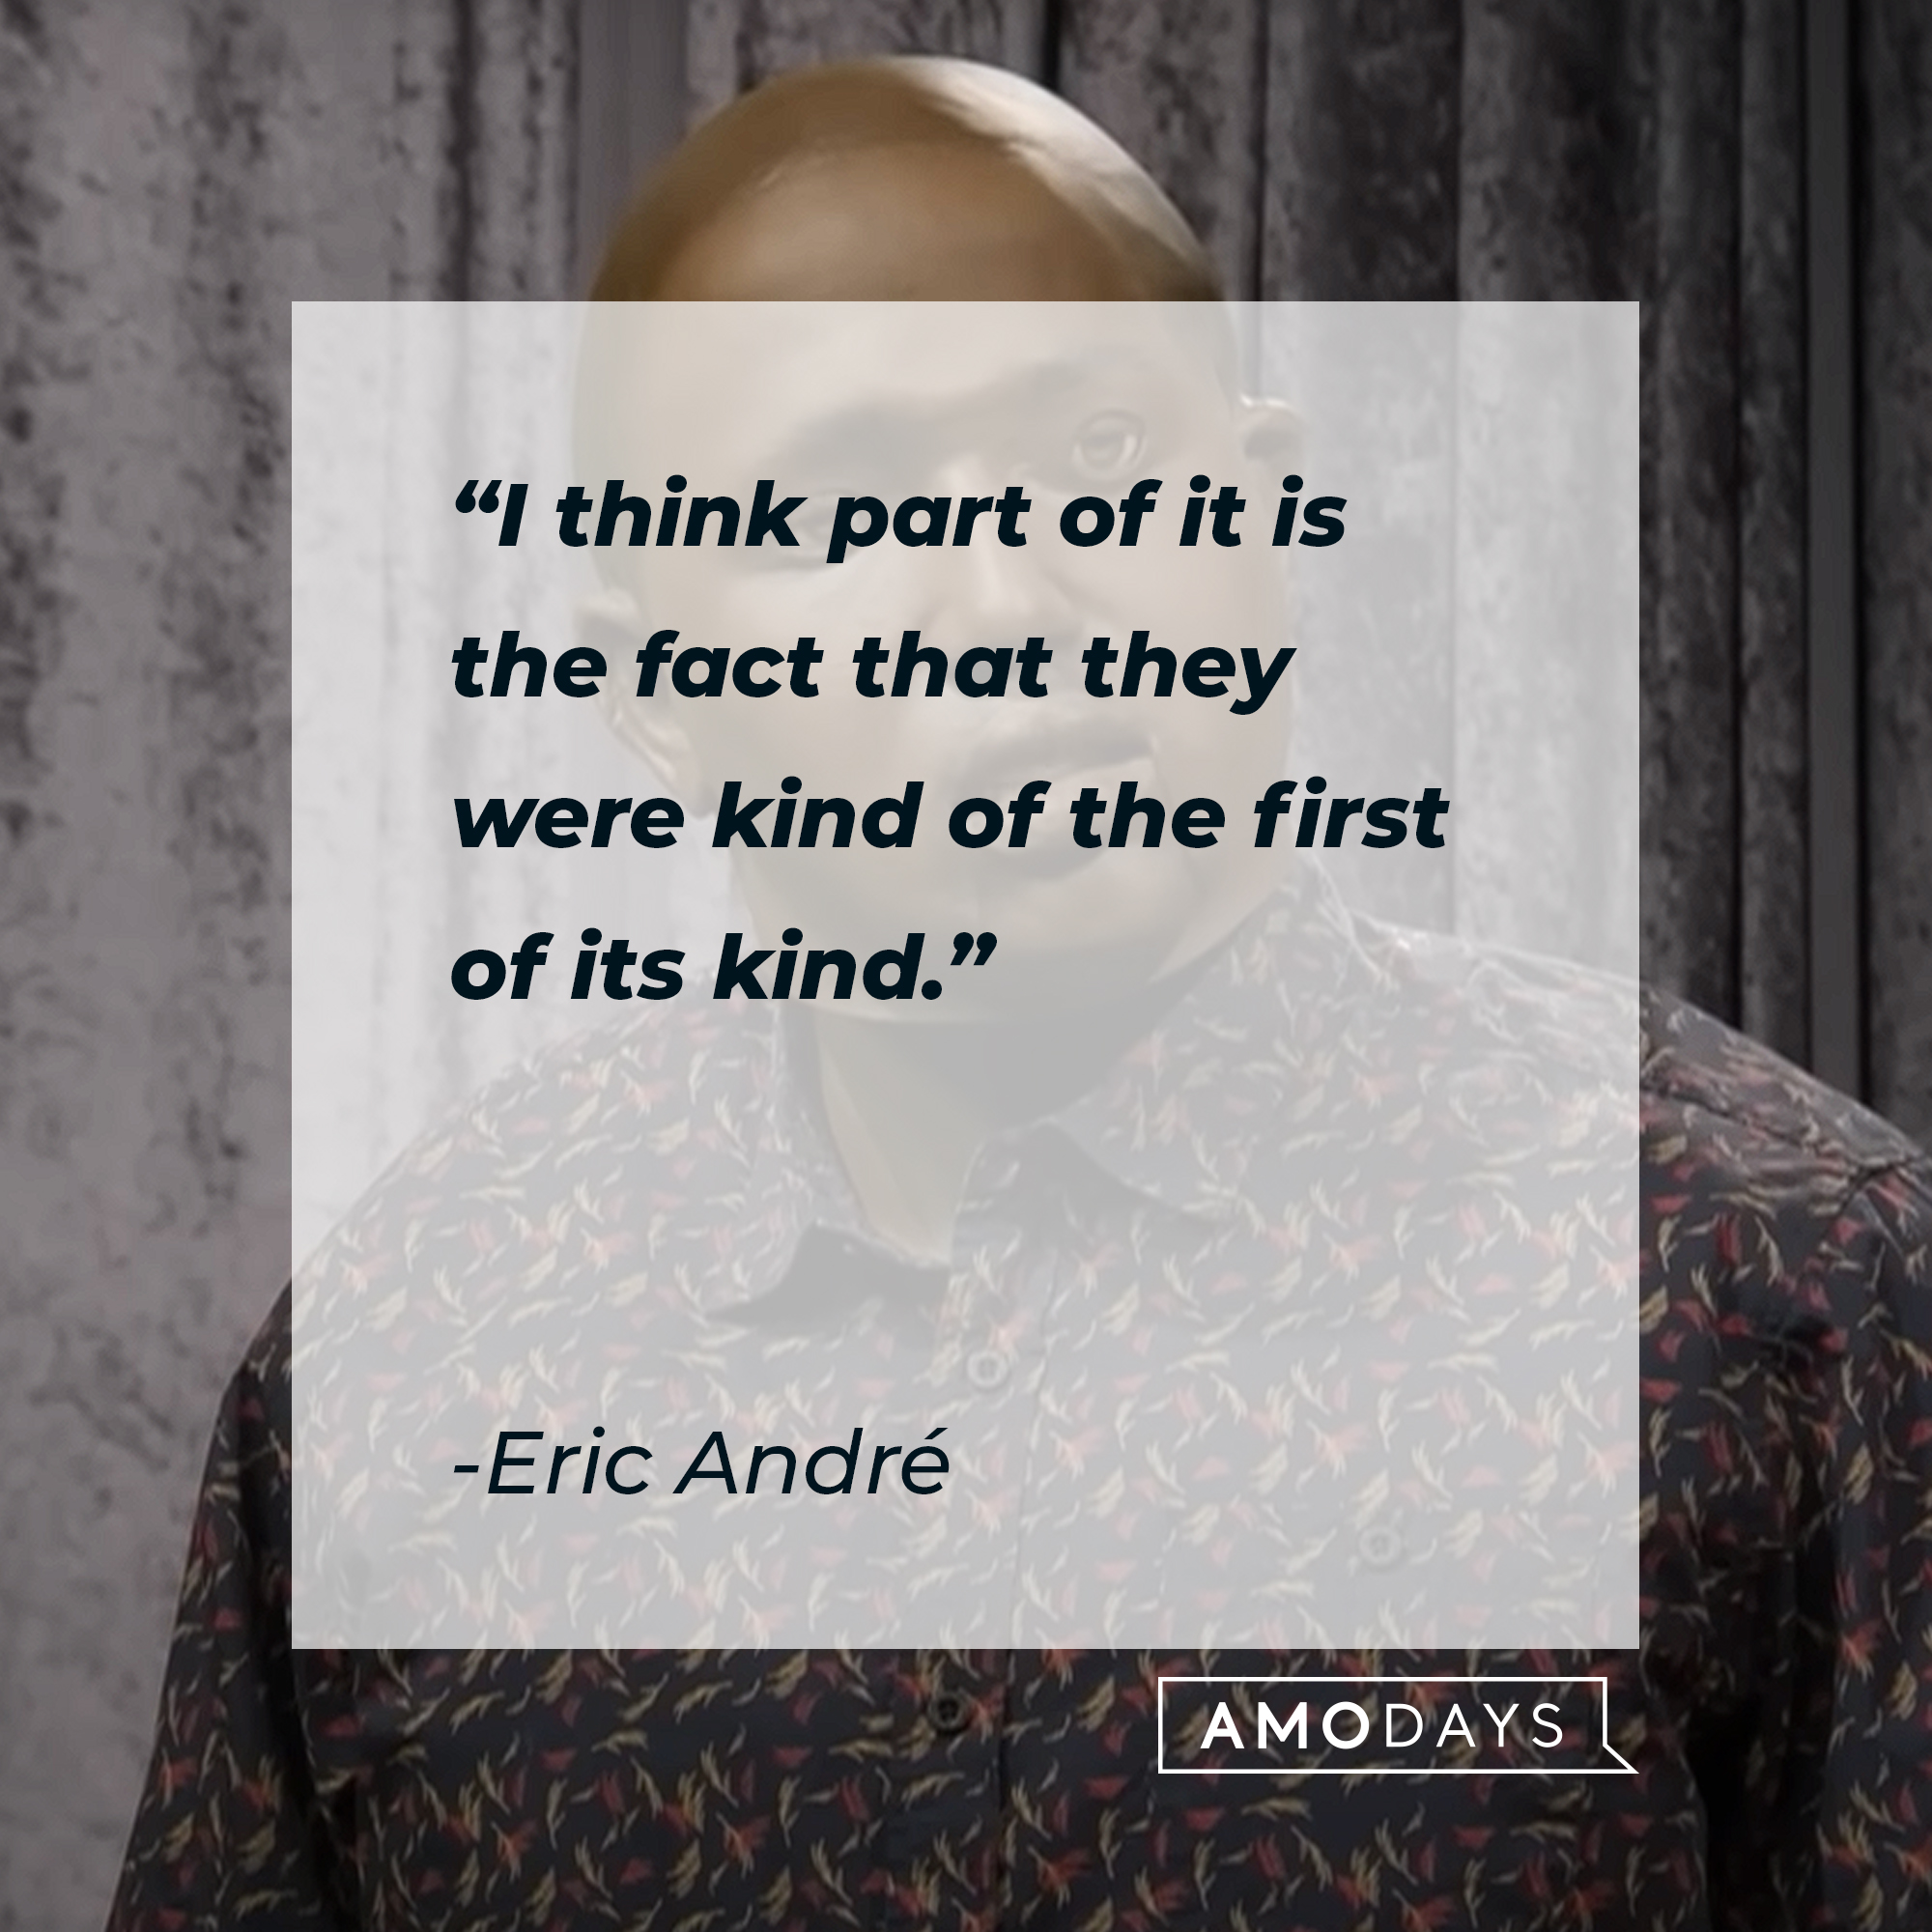 Eric André's quote: "I think part of it is the fact that they were kind of the first of its kind." | Source: Youtube.com/adultswim